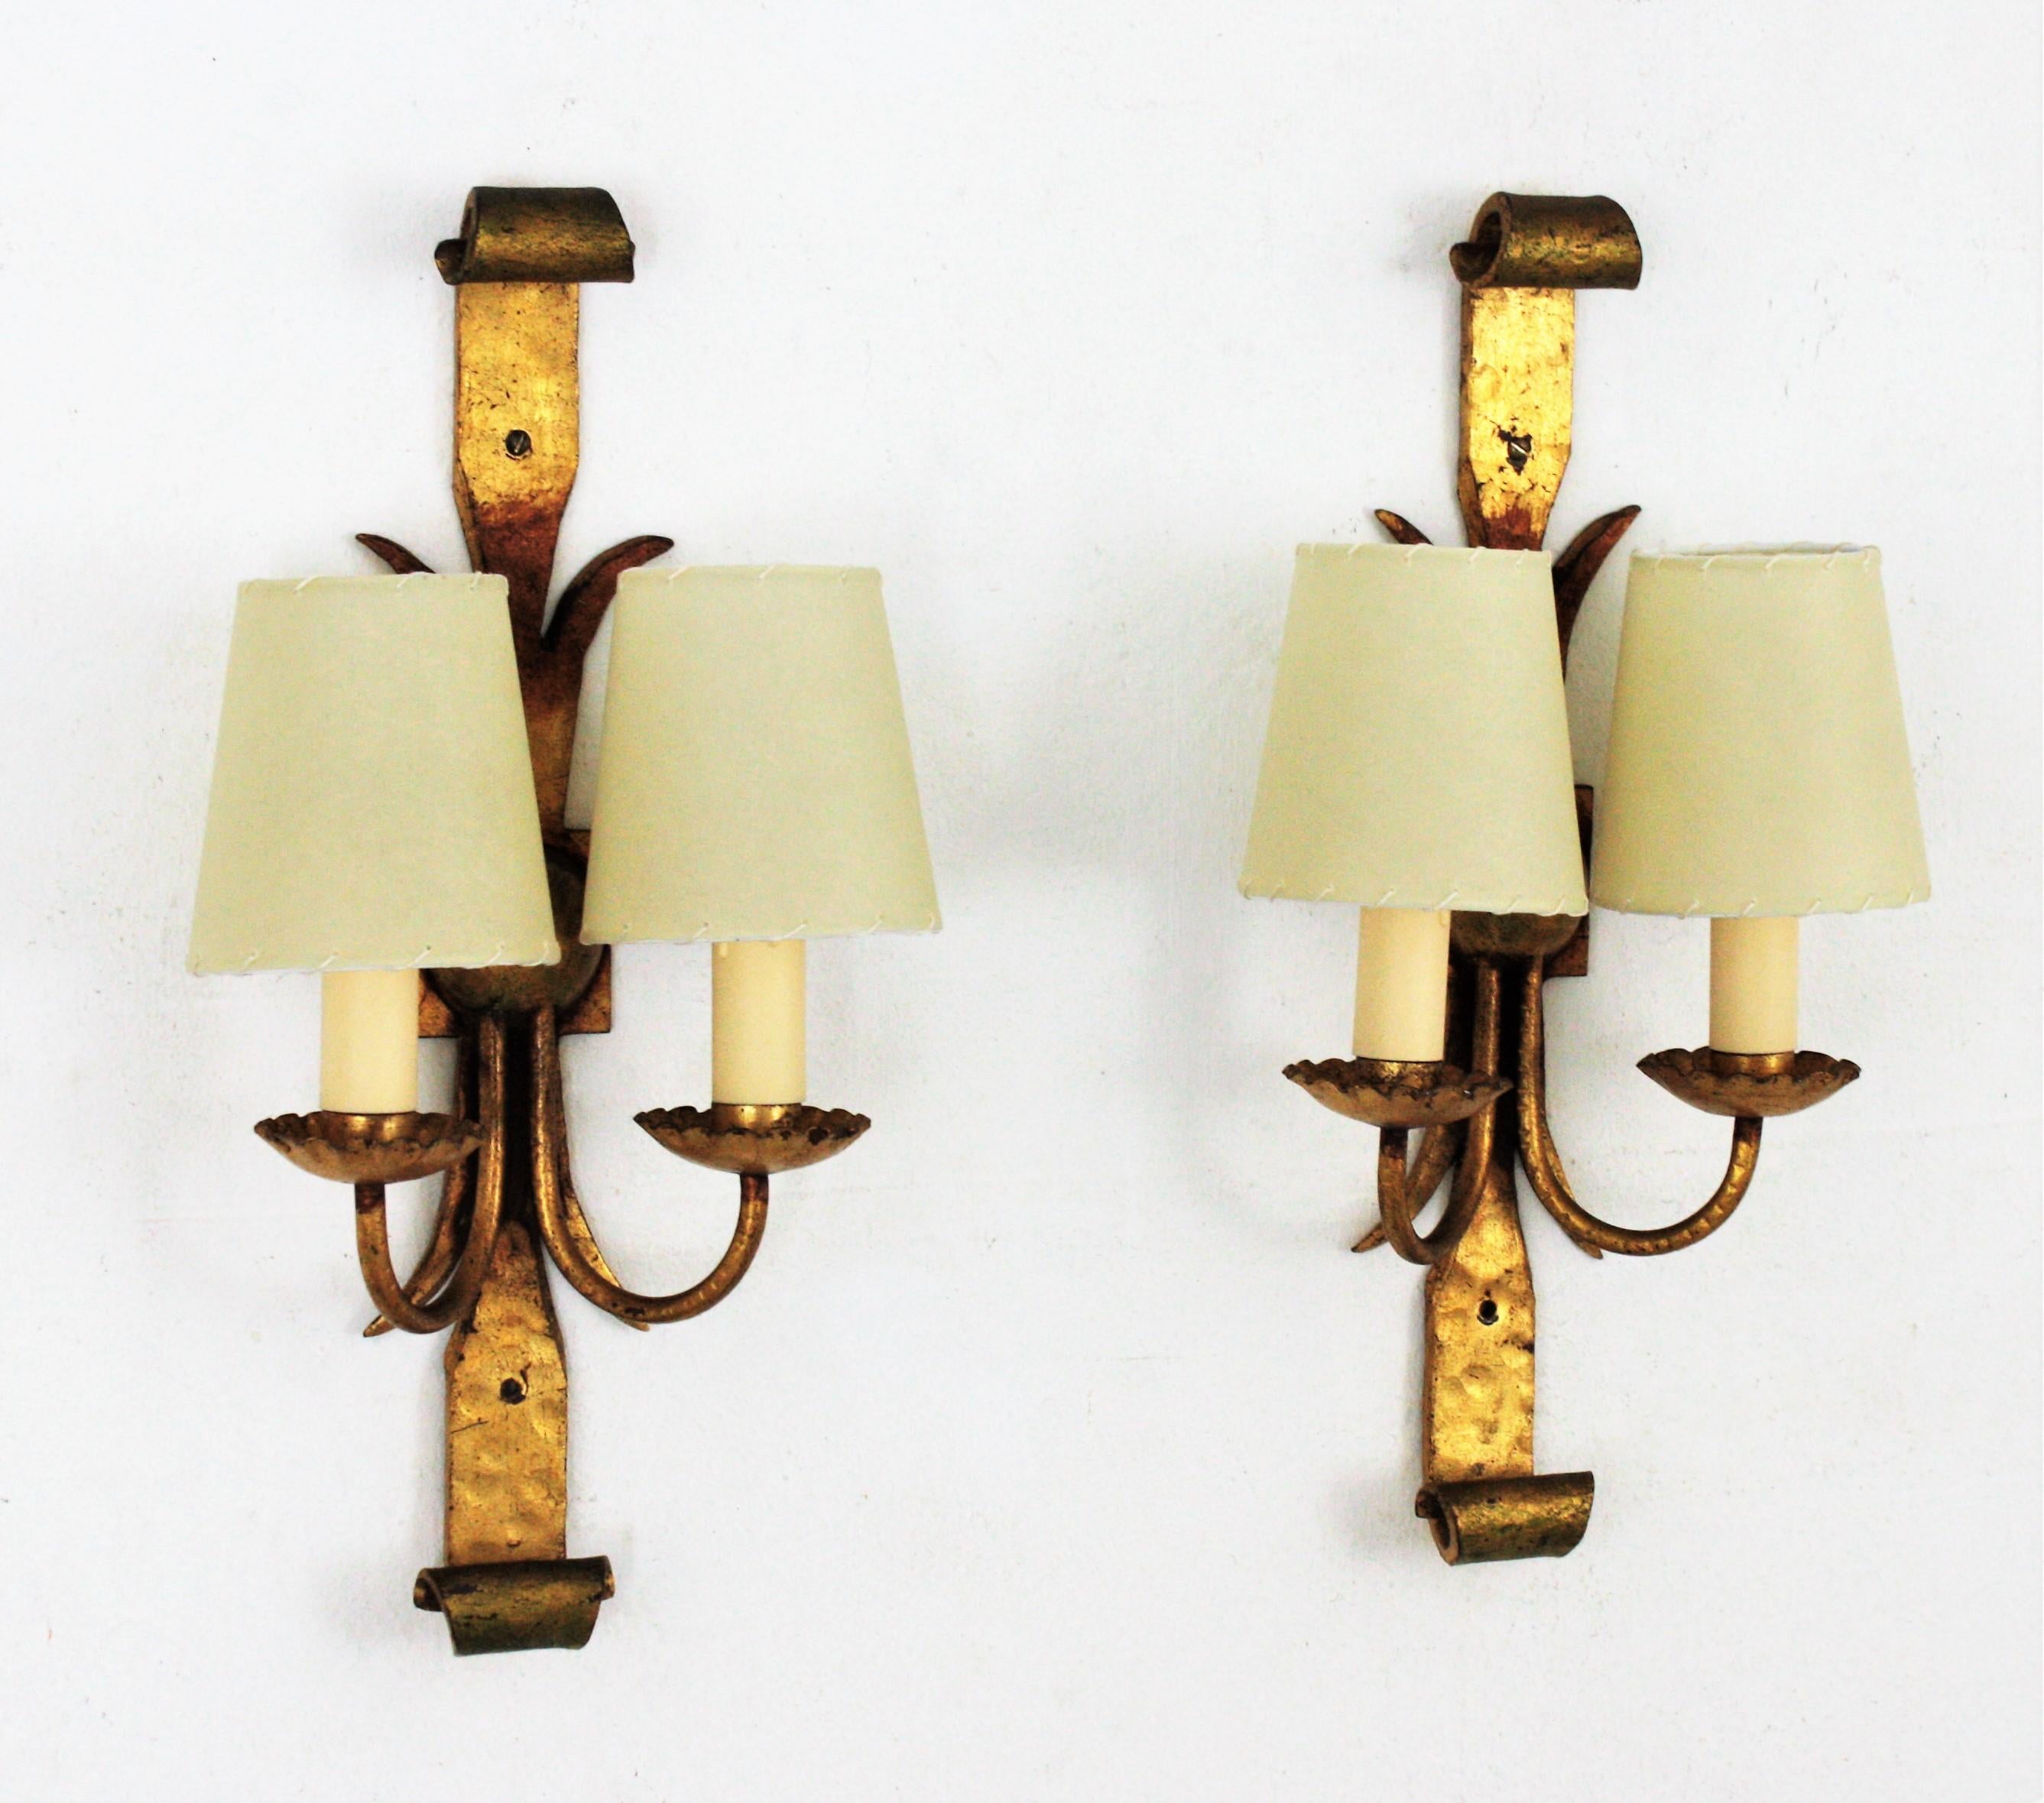 20th Century Pair of Spanish Revival Wall Sconces in Gilt Wrought Iron